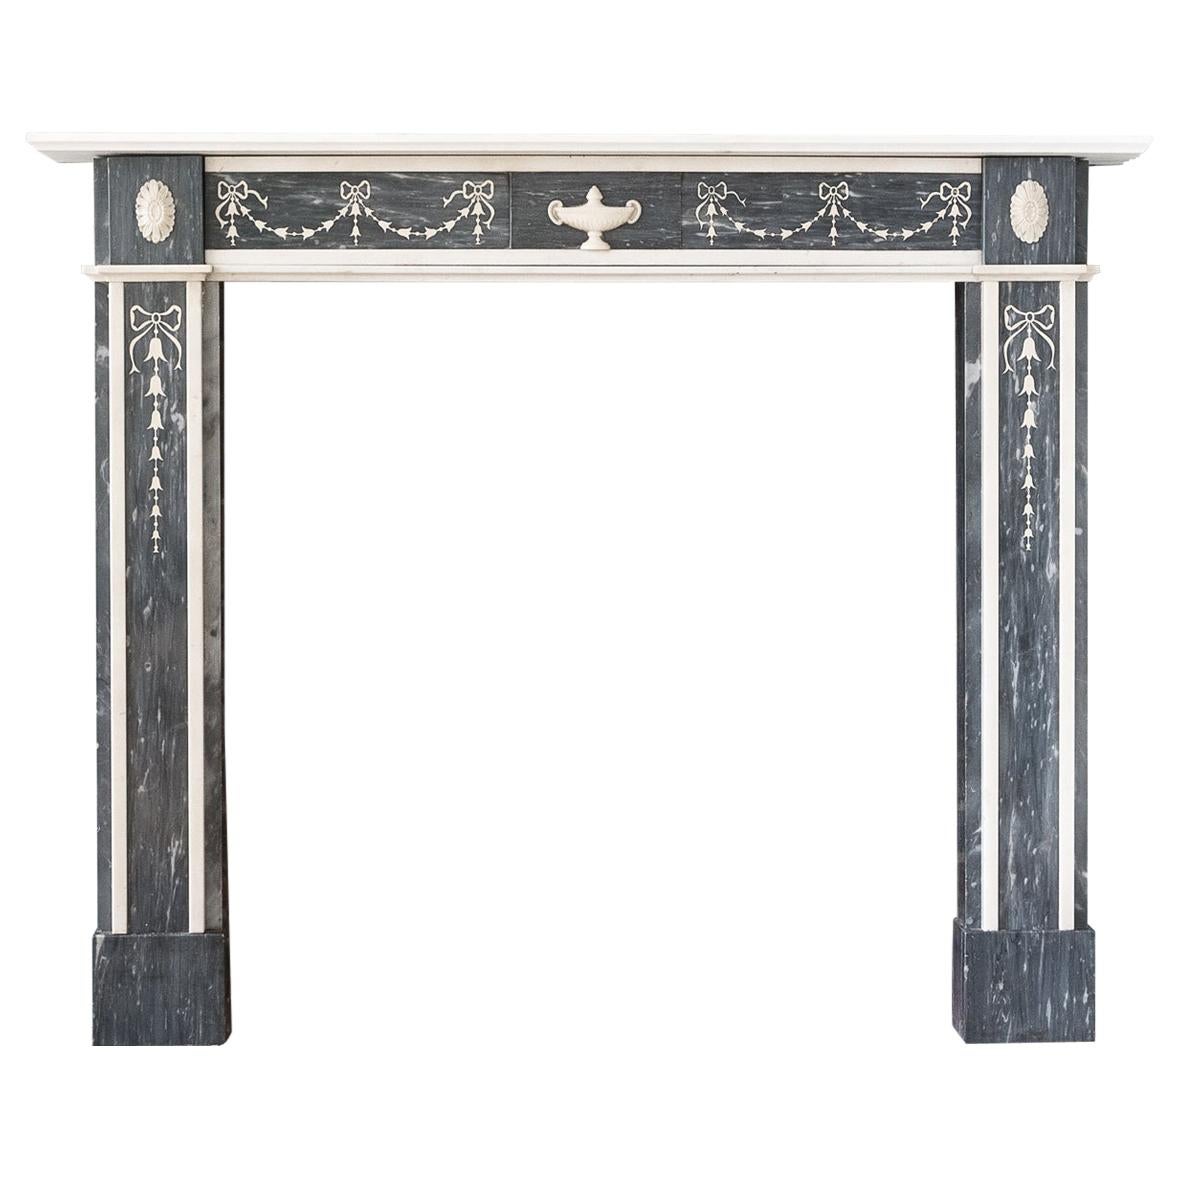 Regency Neoclassical Inlaid Dove Grey and Statuary Marble Fireplace